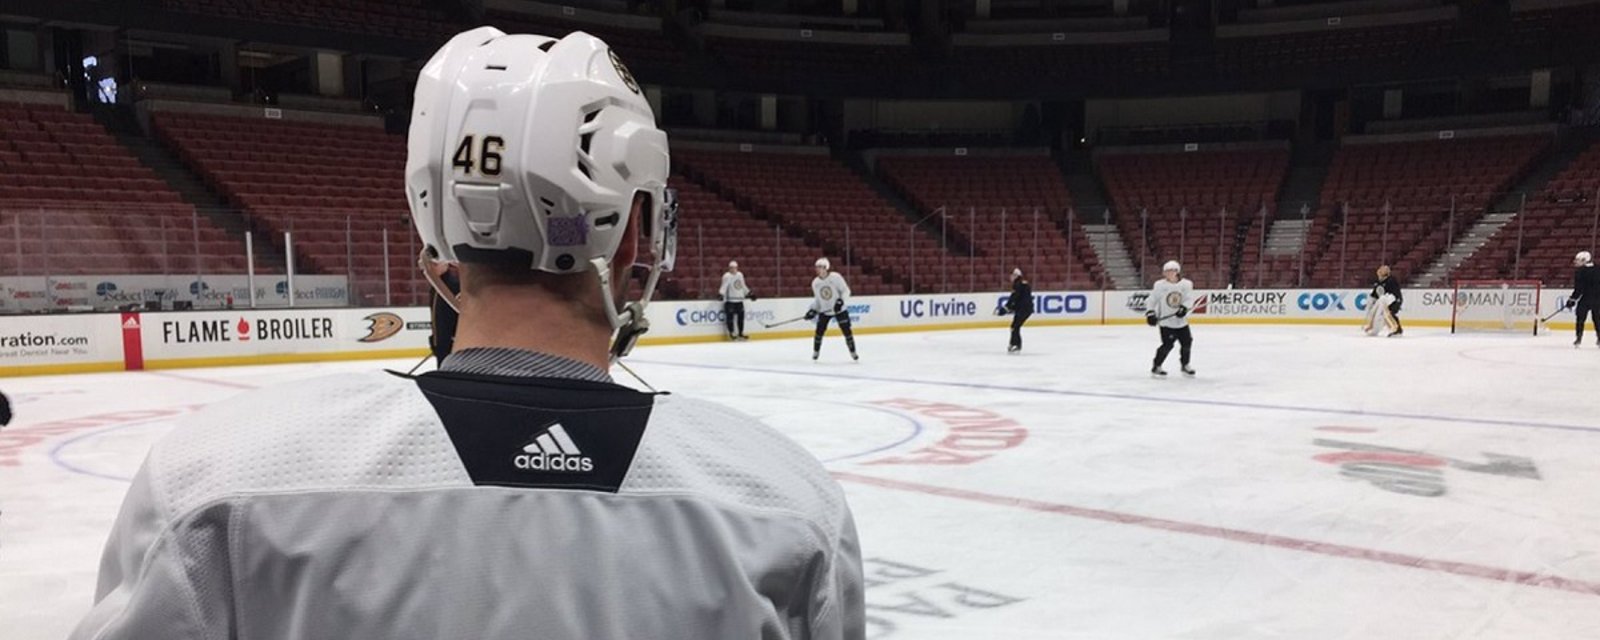 Breaking: Great news from Bruins practice on Tuesday.